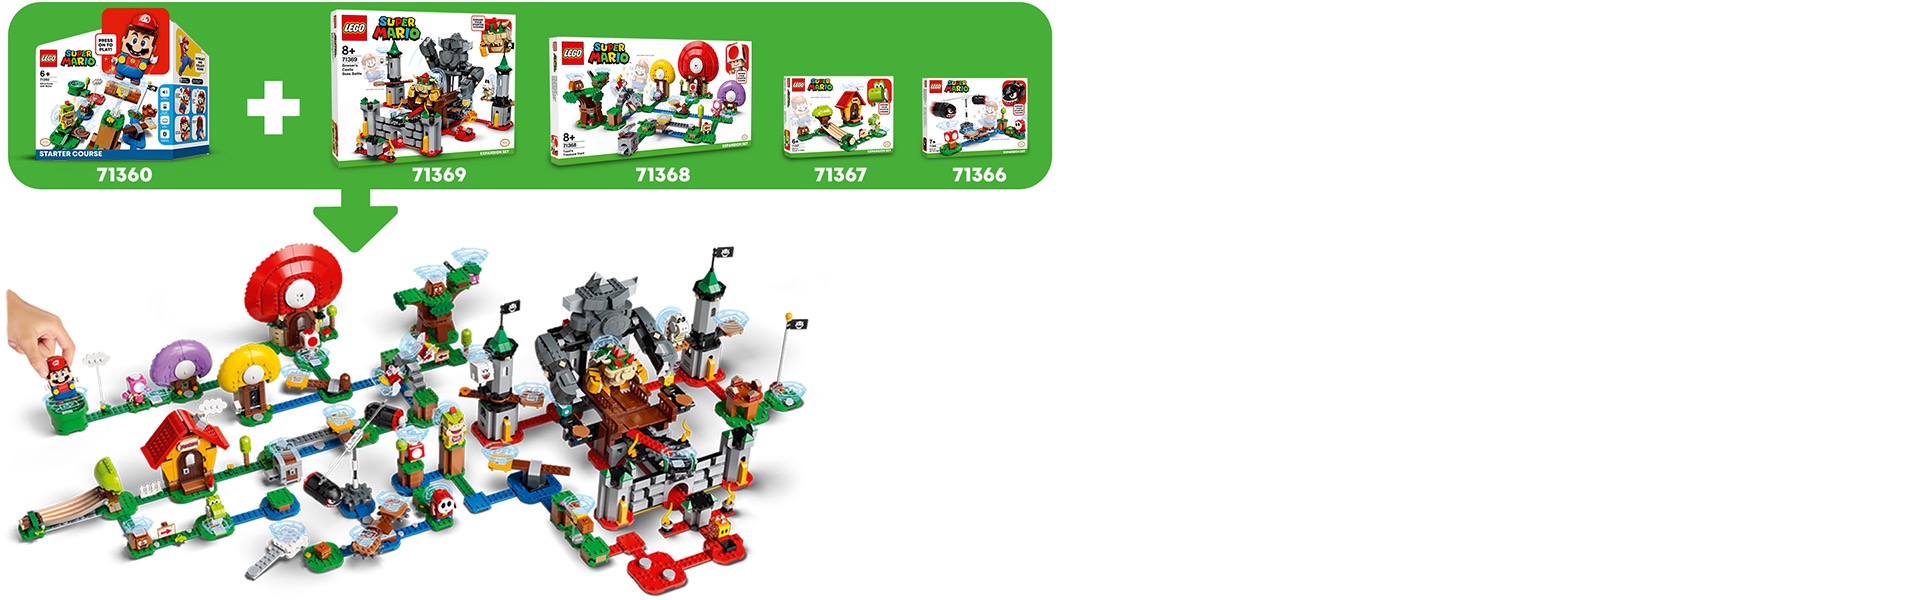 King Boo and the Haunted Yard Expansion Set 71377 | LEGO® Super Mario™ |  Buy online at the Official LEGO® Shop US